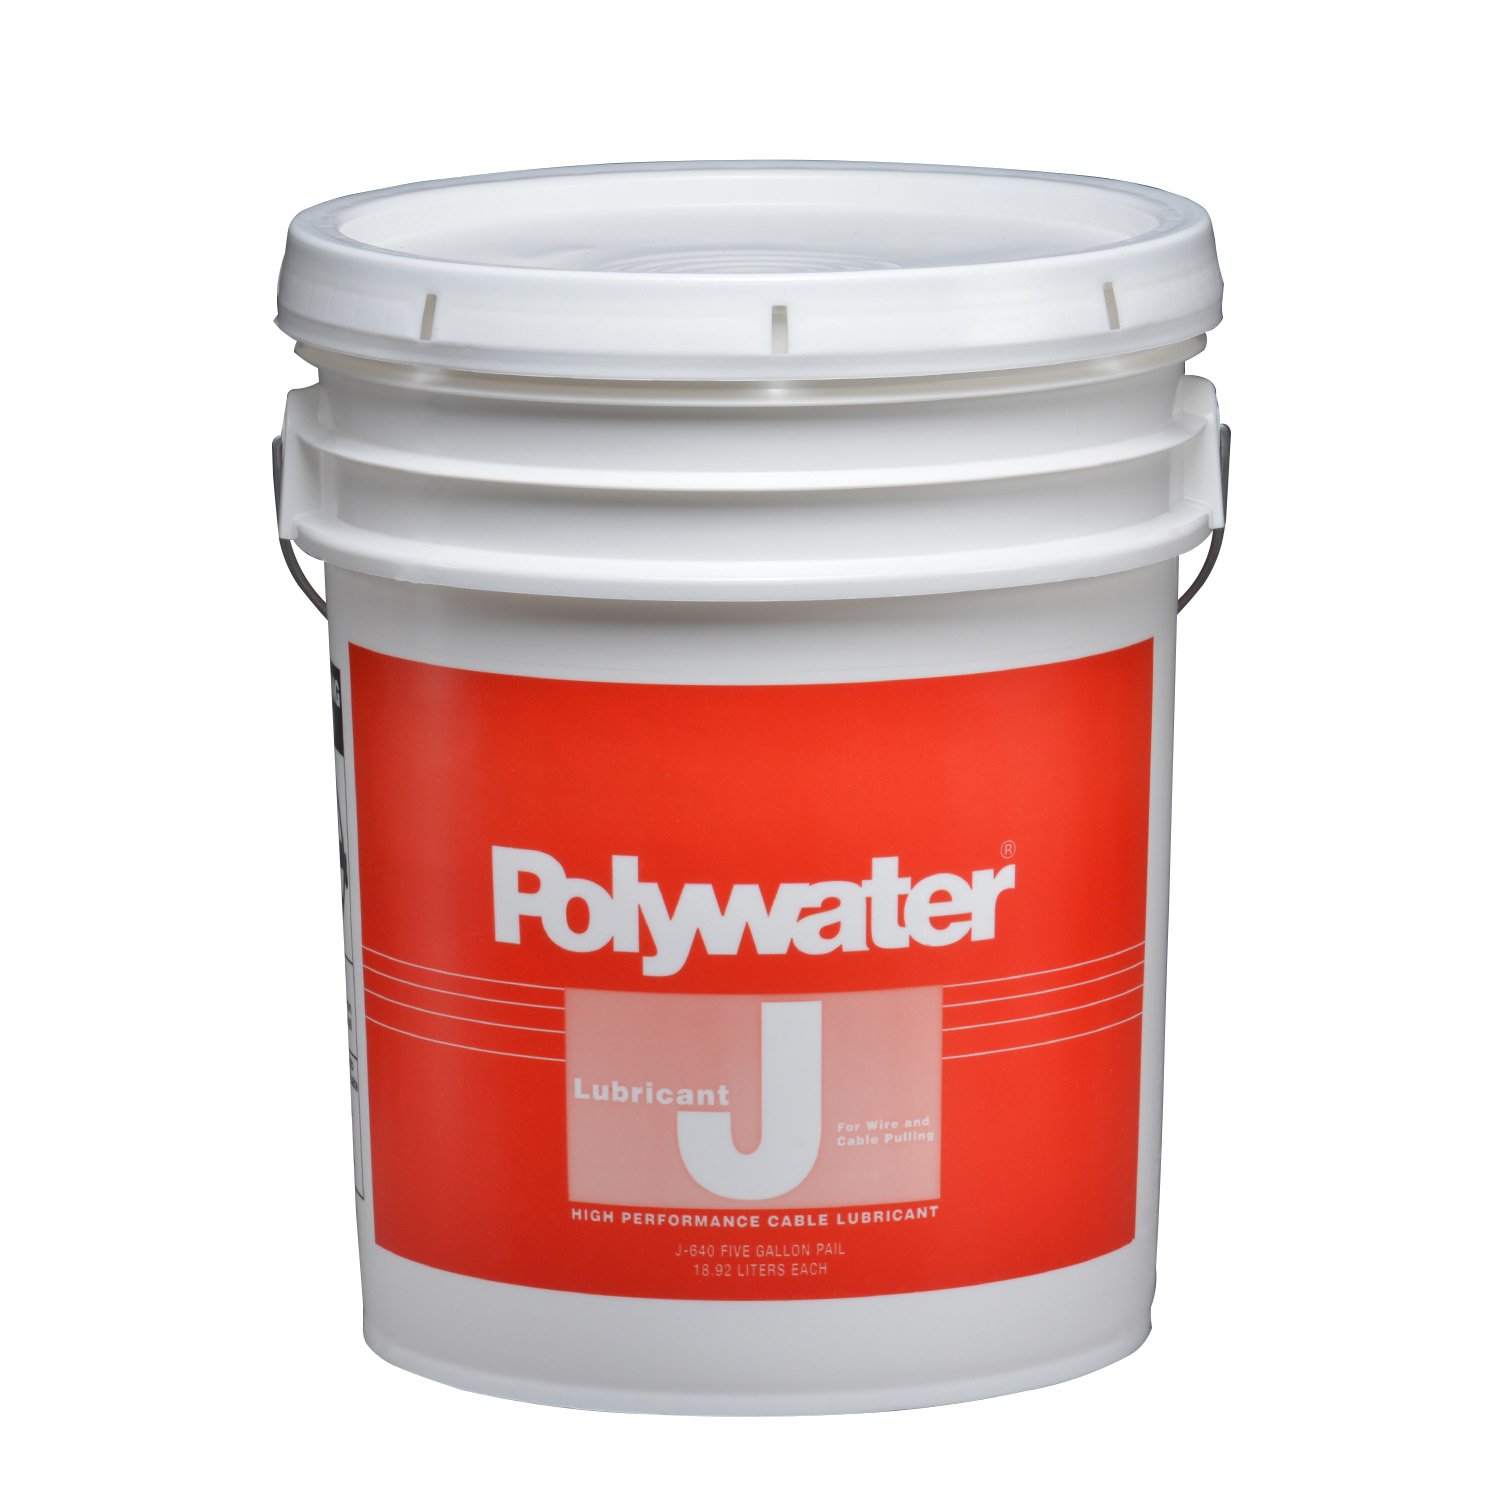 polywater product